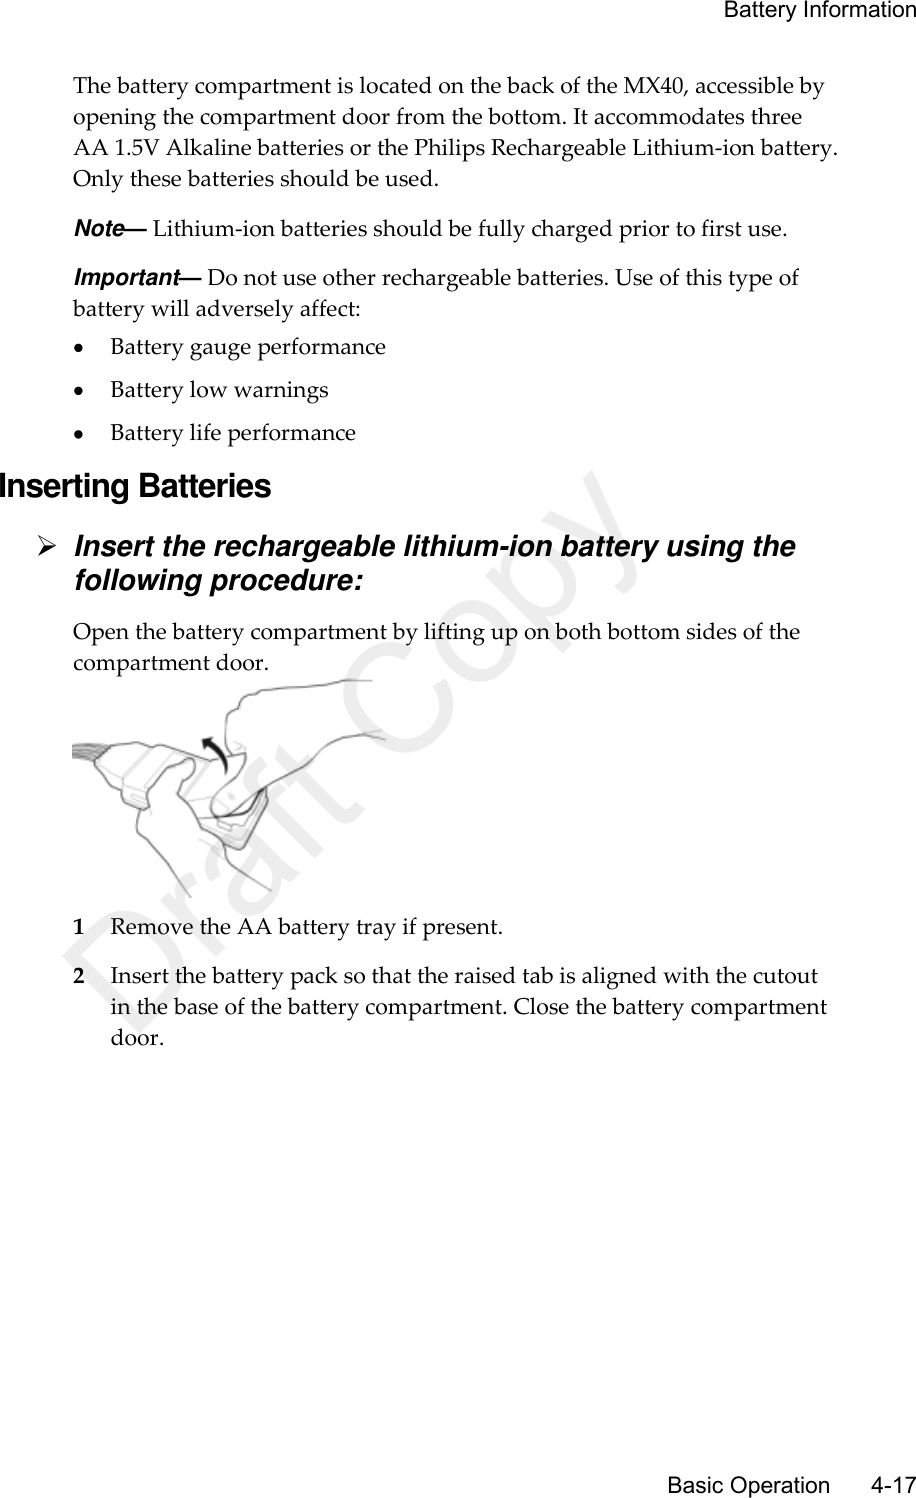     Battery Information       Basic Operation      4-17 The battery compartment is located on the back of the MX40, accessible by opening the compartment door from the bottom. It accommodates three AA 1.5V Alkaline batteries or the Philips Rechargeable Lithium-ion battery. Only these batteries should be used. Note— Lithium-ion batteries should be fully charged prior to first use. Important— Do not use other rechargeable batteries. Use of this type of battery will adversely affect:  Battery gauge performance  Battery low warnings  Battery life performance Inserting Batteries  Insert the rechargeable lithium-ion battery using the following procedure: Open the battery compartment by lifting up on both bottom sides of the compartment door.  1 Remove the AA battery tray if present. 2 Insert the battery pack so that the raised tab is aligned with the cutout in the base of the battery compartment. Close the battery compartment door. Draft Copy